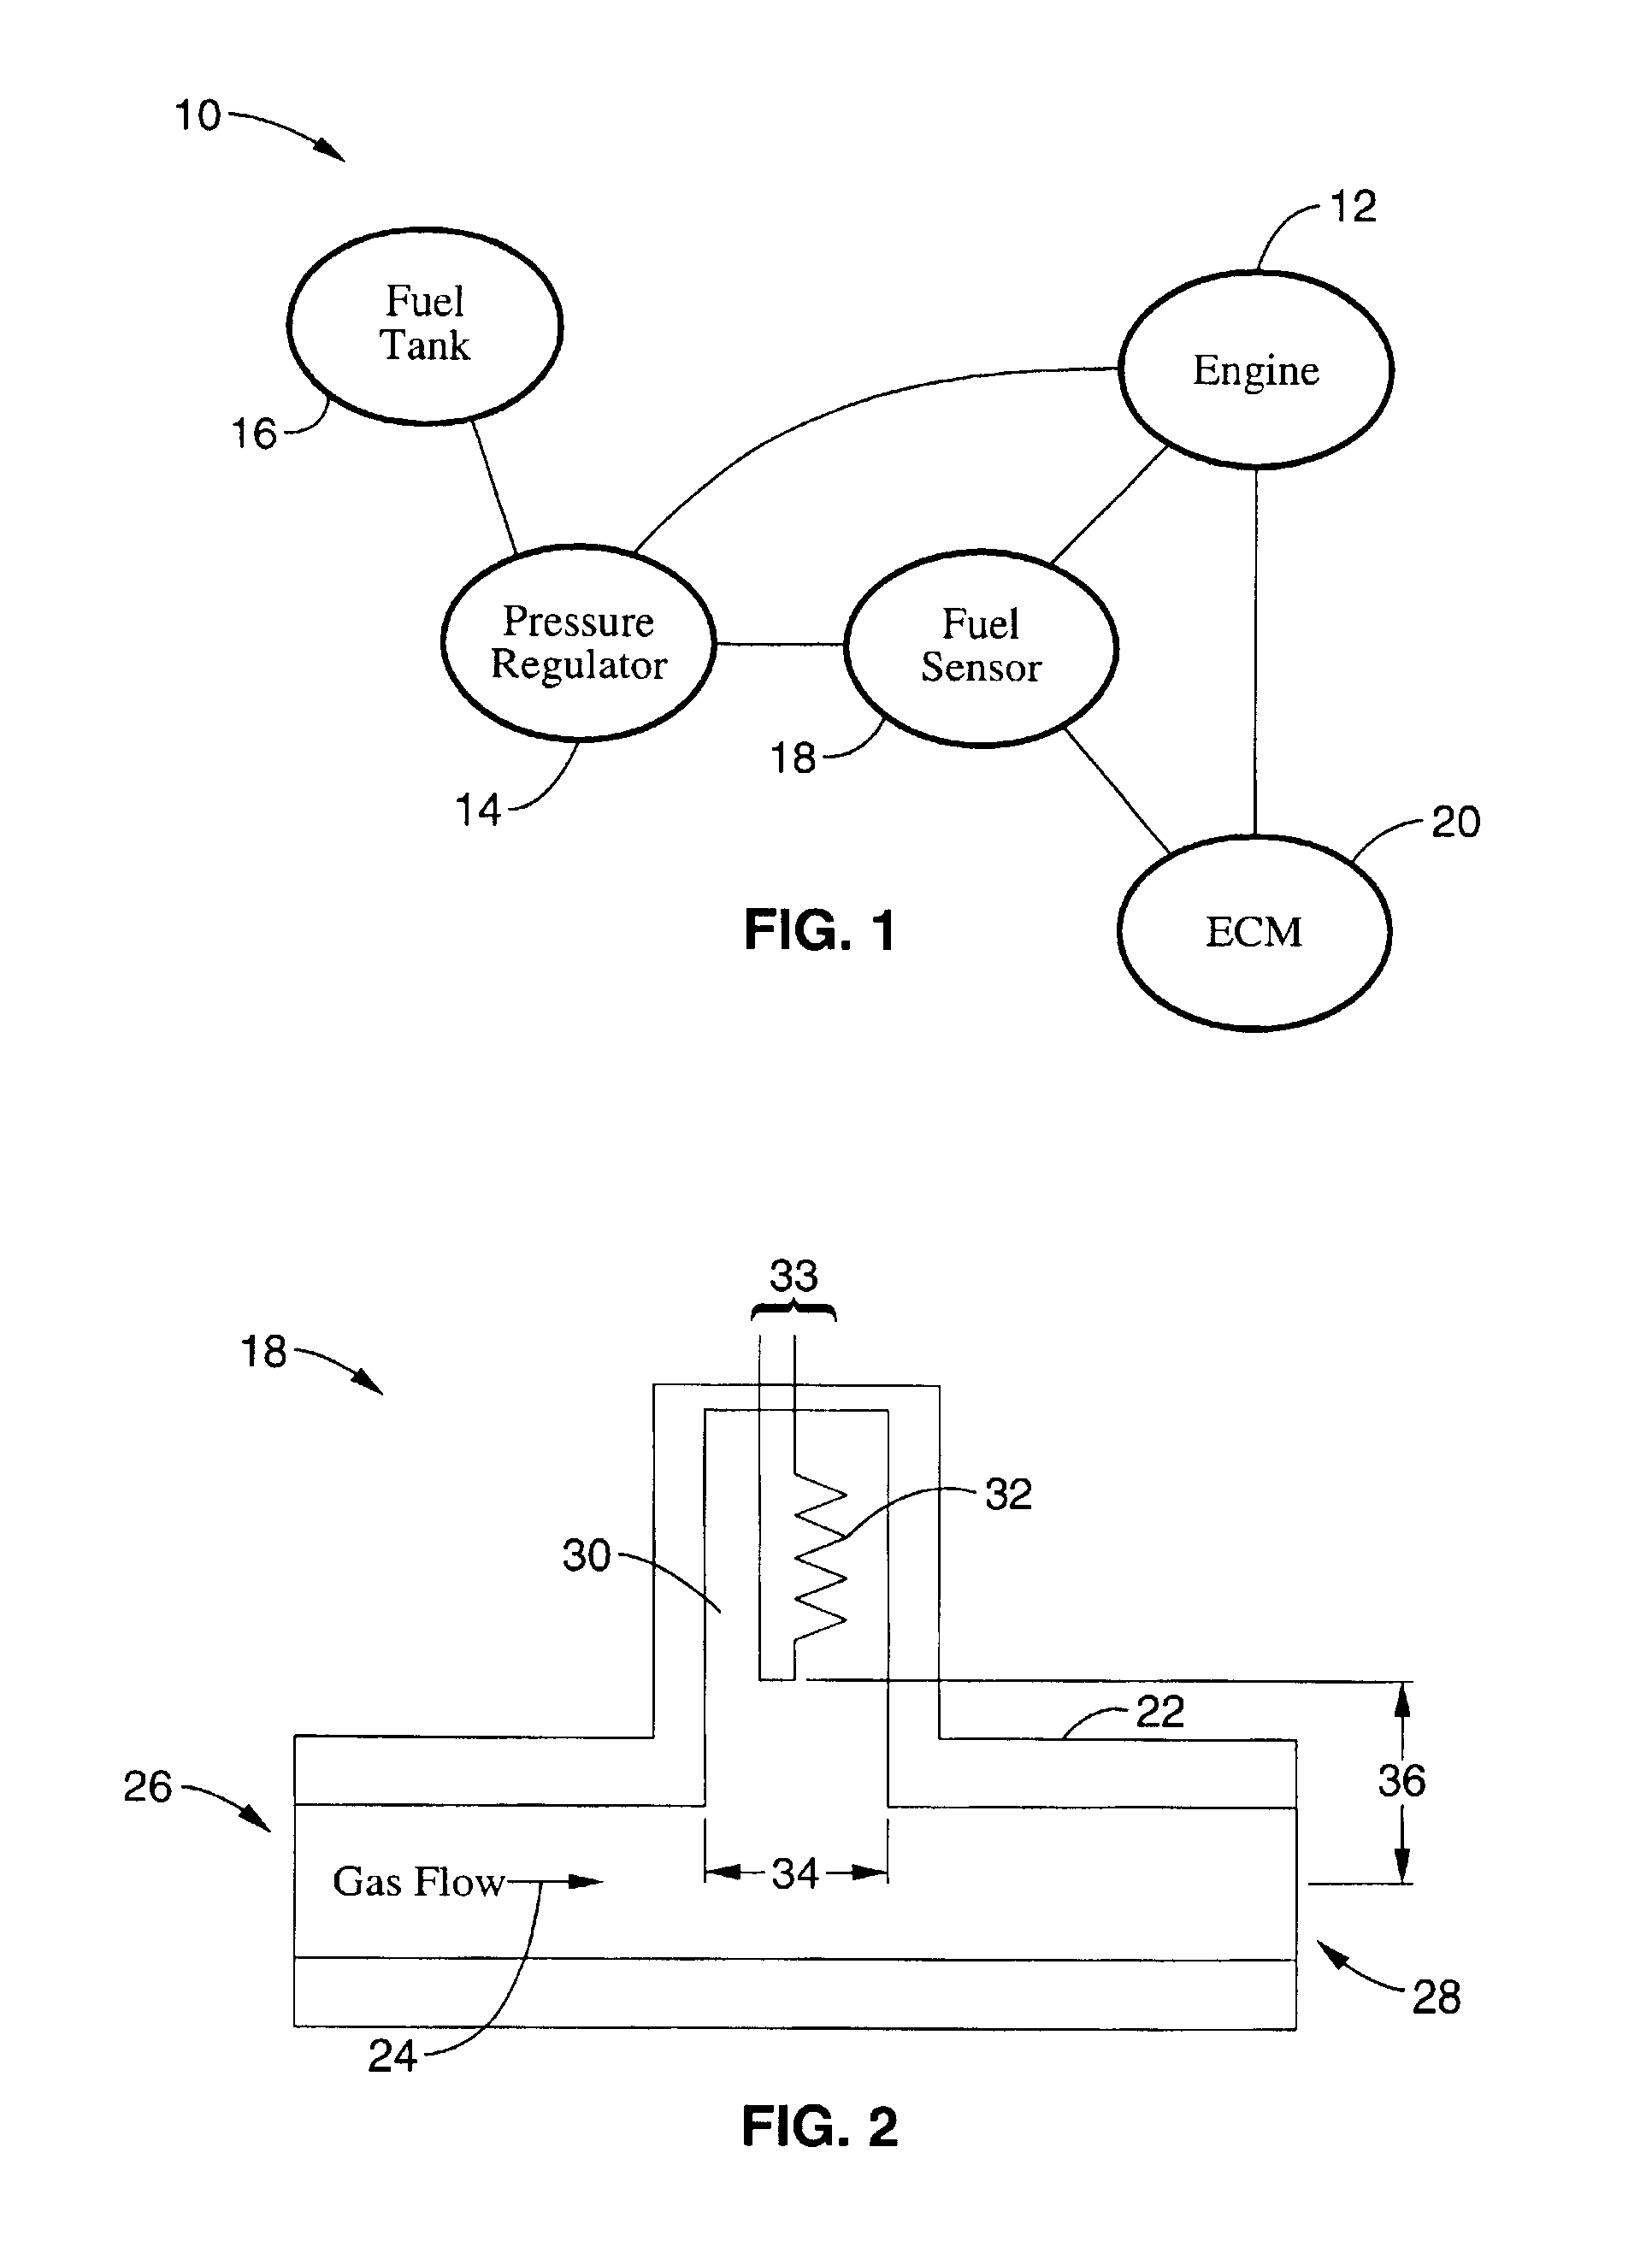 Apparatus and method for operating internal combustion engines from variable mixtures of gaseous fuels